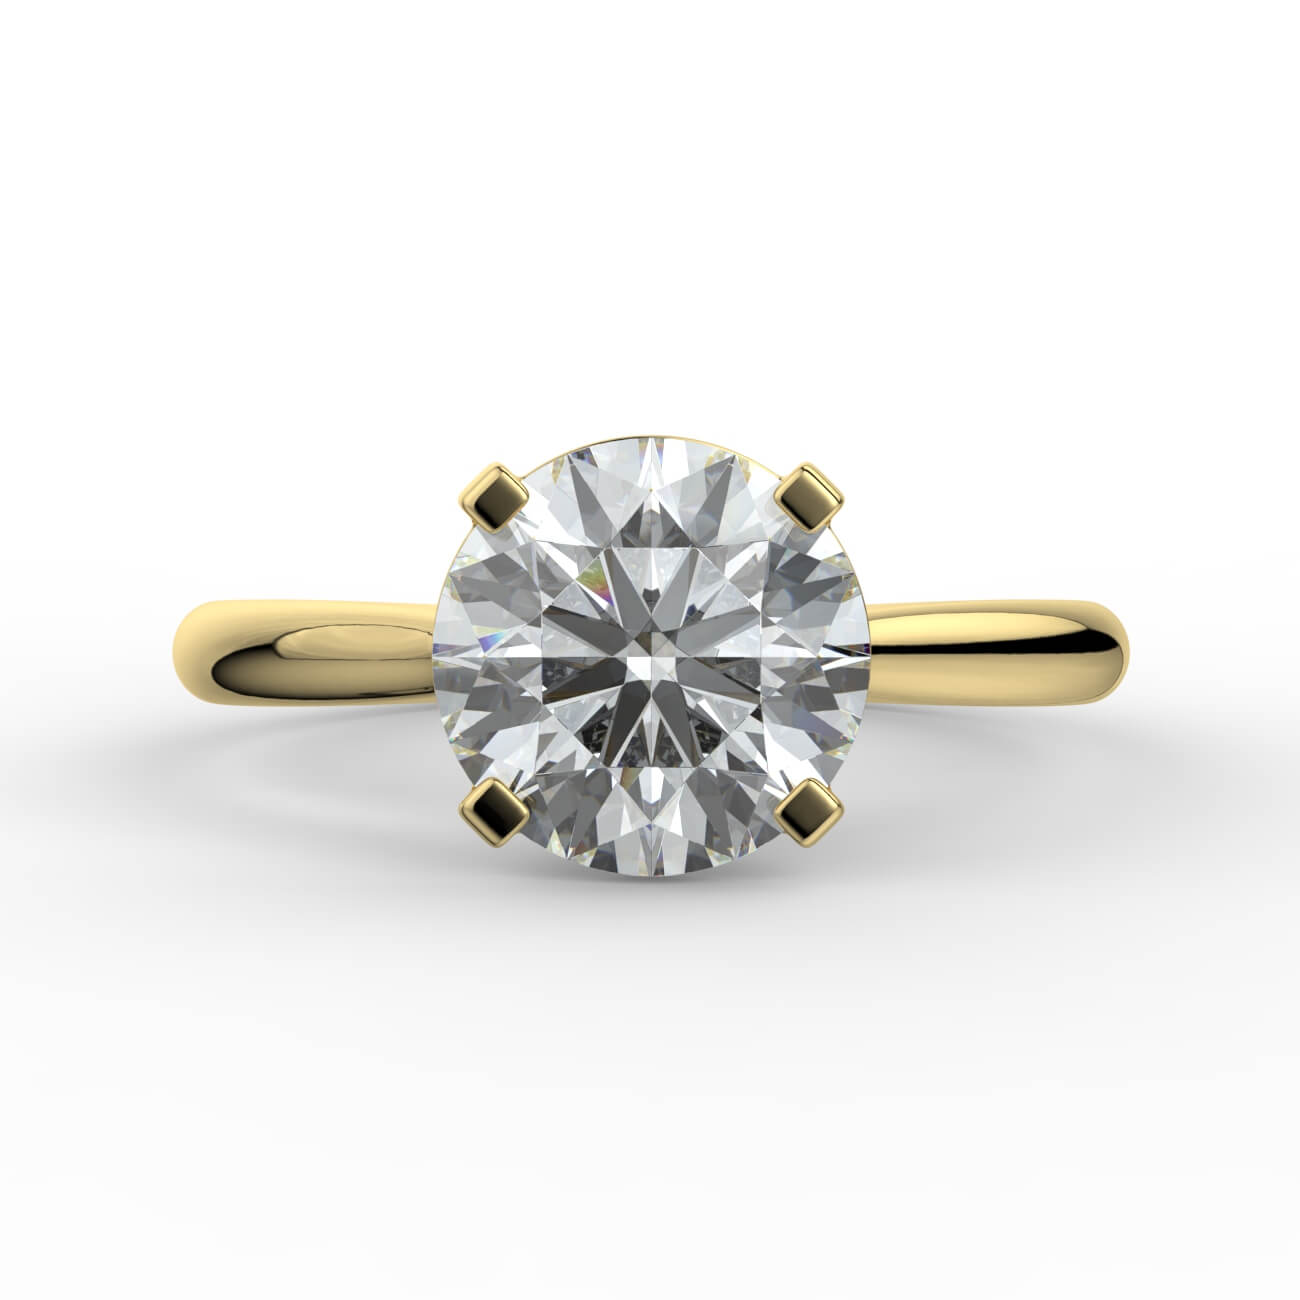 Round brilliant cut diamond cathedral engagement ring in yellow gold – Australian Diamond Network